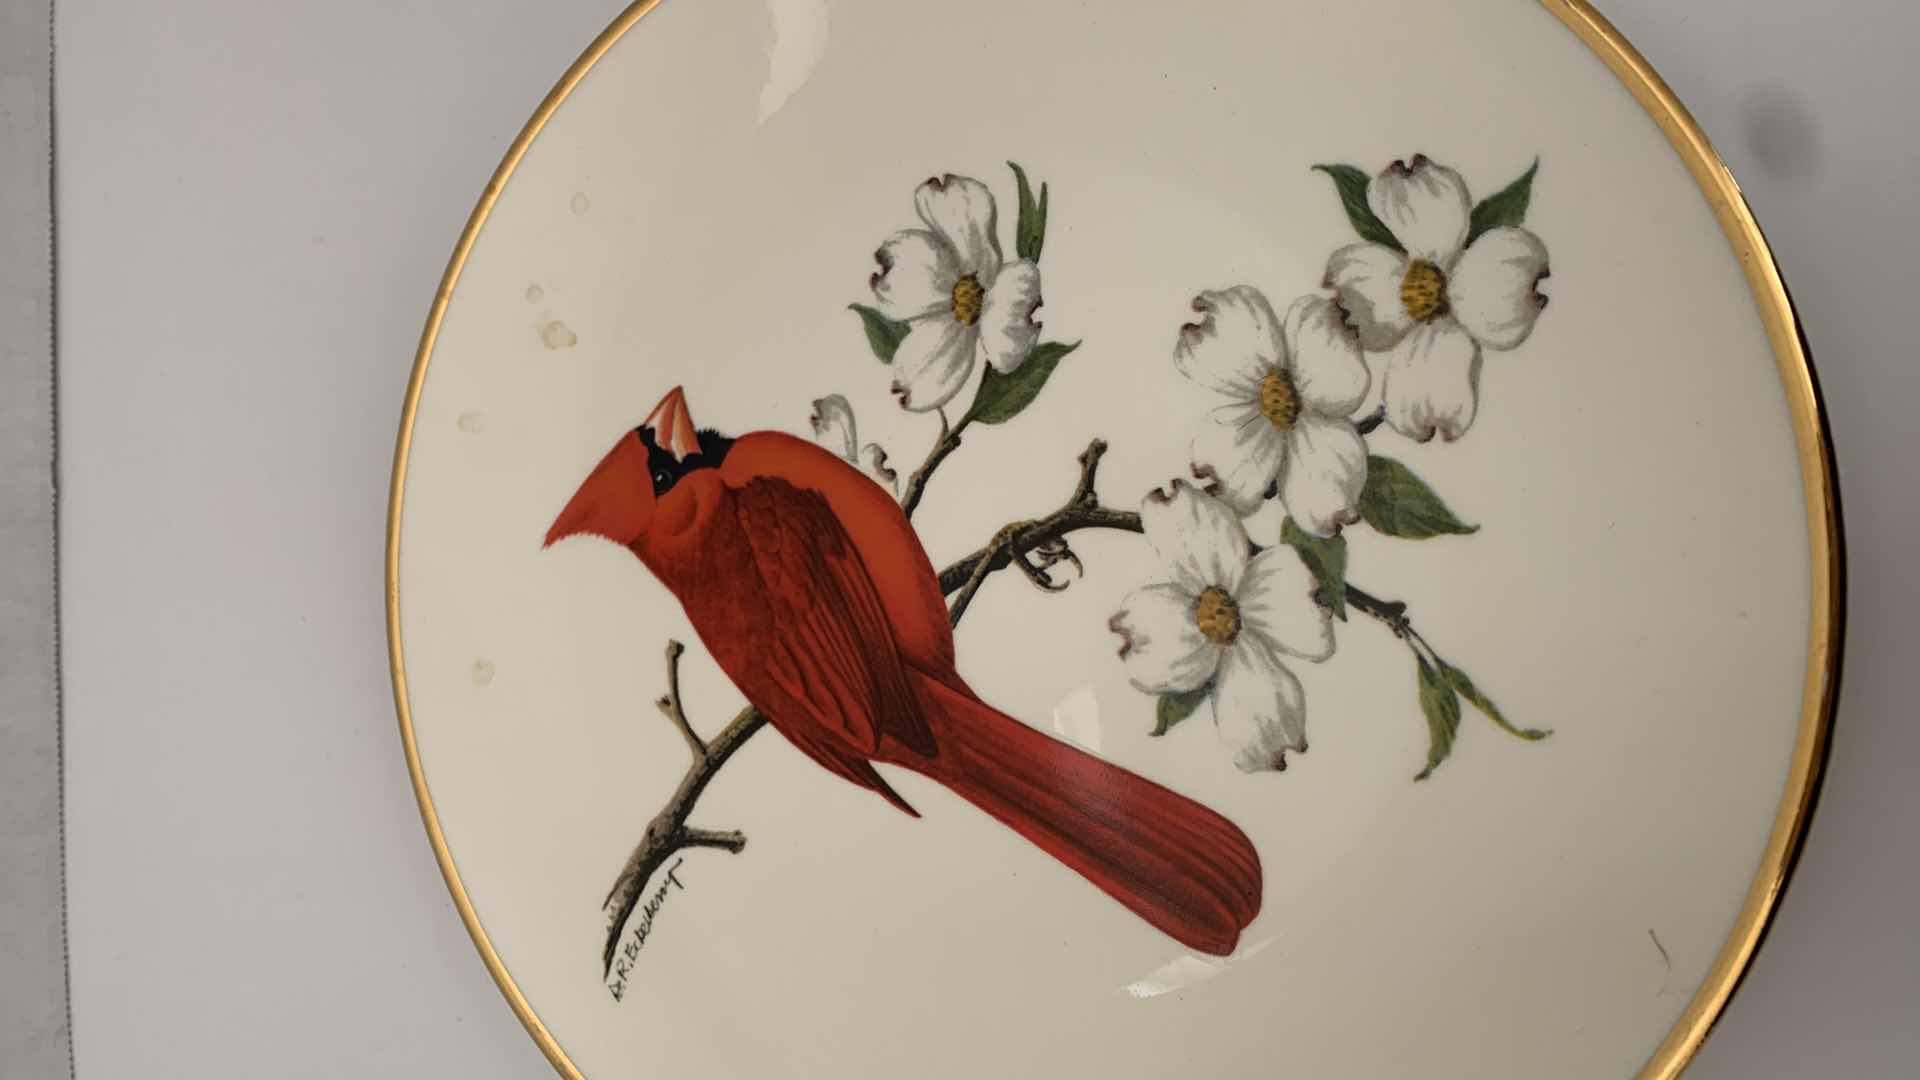 Photo 2 of AVON PRODUCTS “CARDINAL” PLATE 11” WIDE